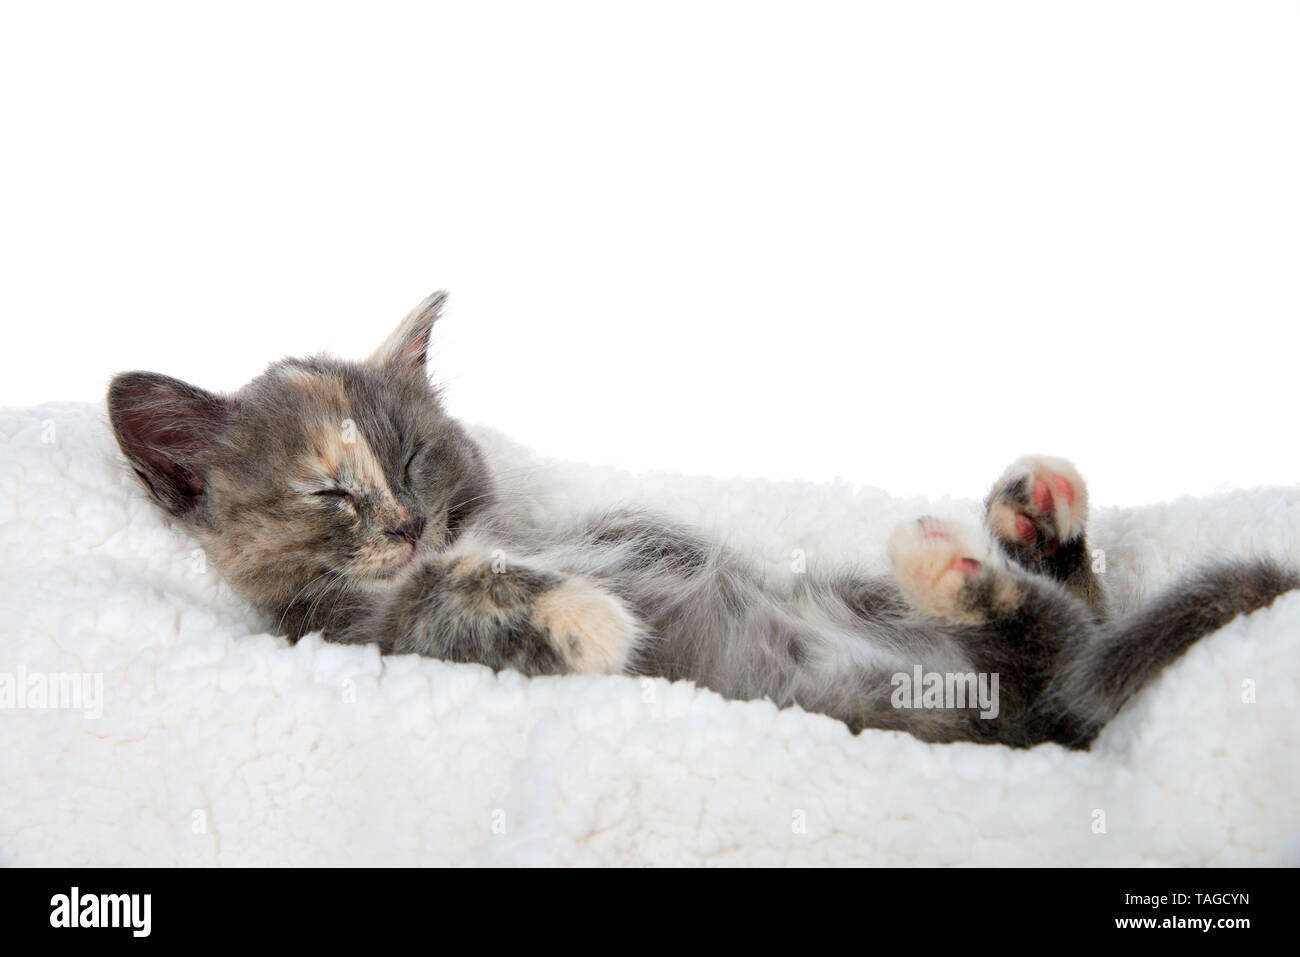 Adorable diluted tortie kitten sleeping upside down on a sheep skin blanket, paws upwards. Isolated on white background. Stock Photo